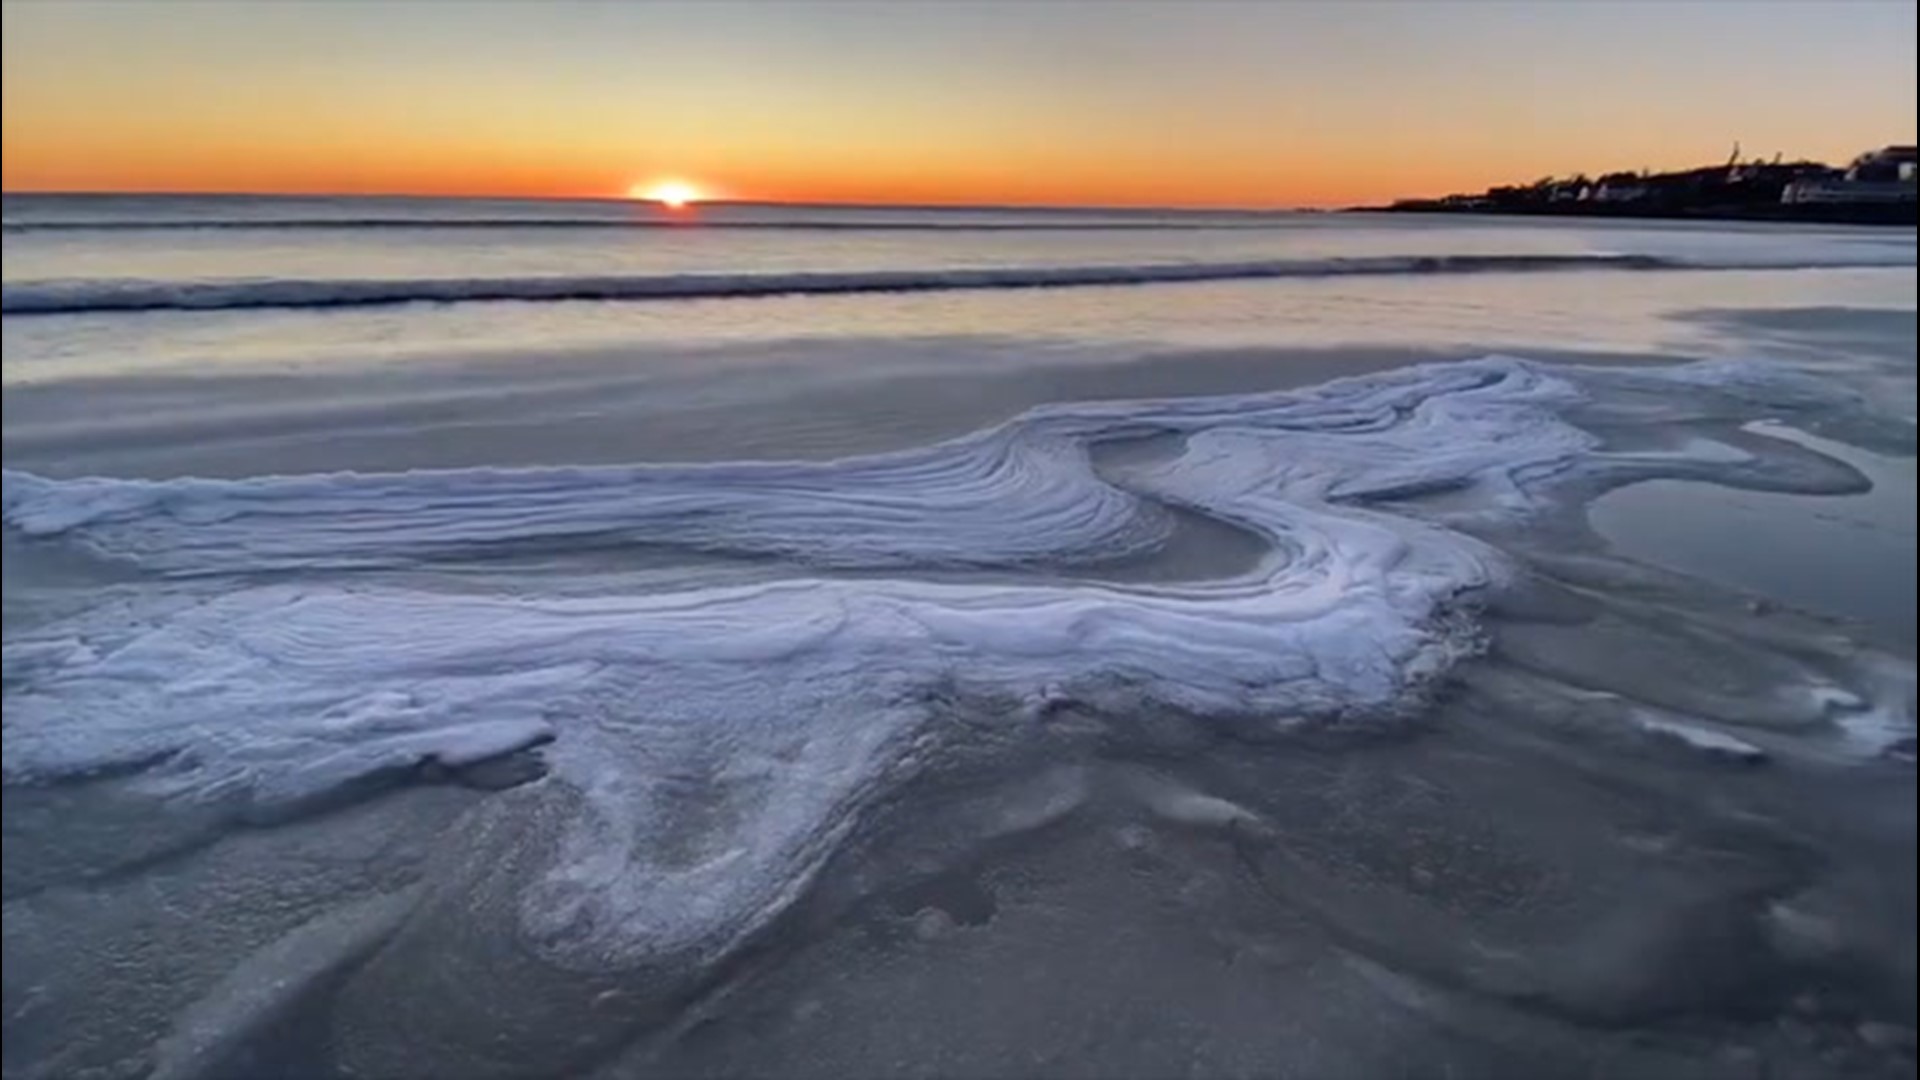 The sun rose to greet the town of Ogunquit on Sunday, Jan. 24, with breezy conditions and very low temperatures.